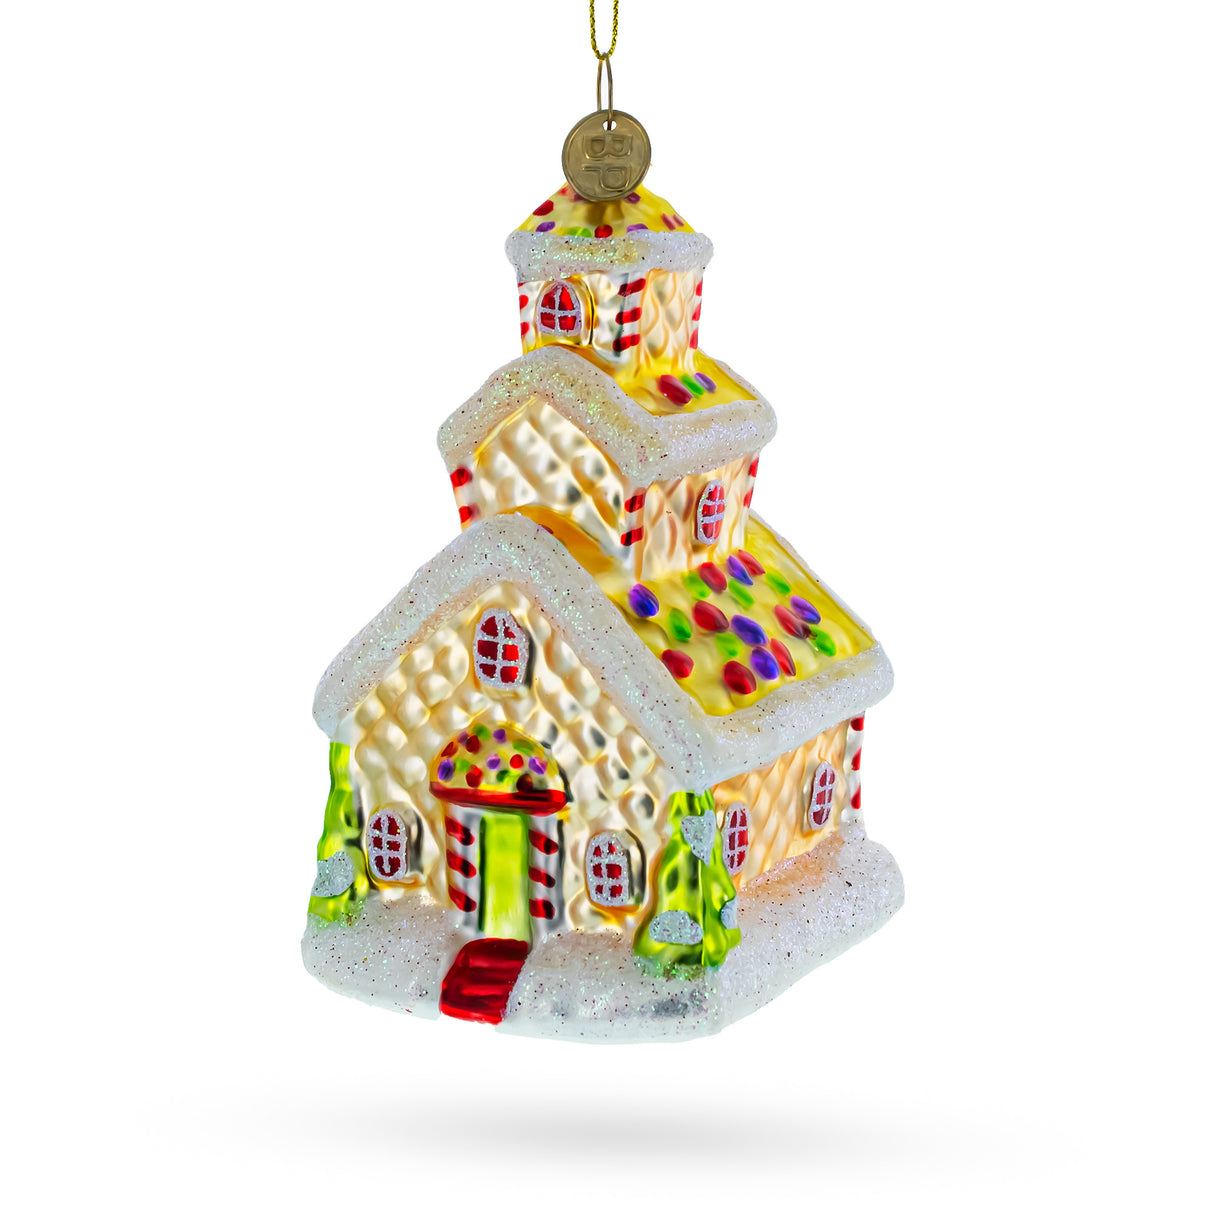 Sweet Gingerbread House Adorned with Candy Canes - Detailed  Blown Glass Christmas Ornament in Orange color,  shape